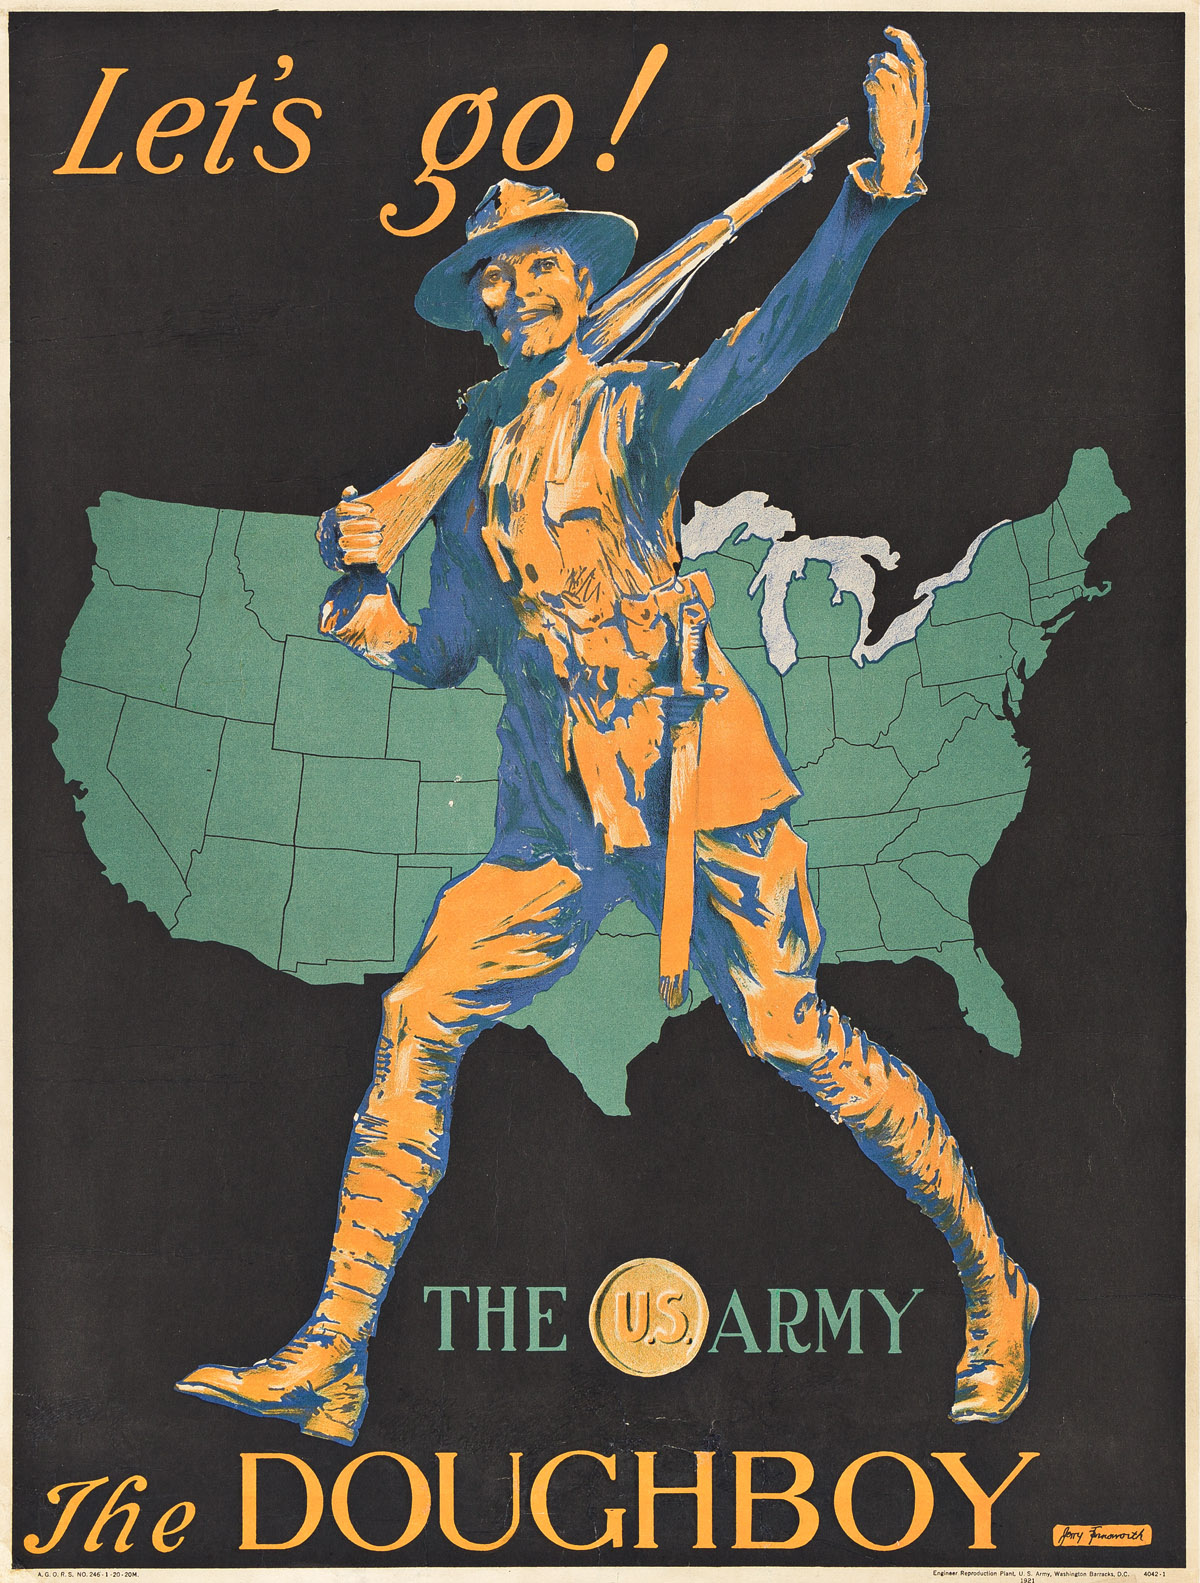 JERRY FARNSWORTH (1895-1983).  LETS GO! THE U.S. ARMY / THE DOUGHBOY. 1921. 24¼x18½ inches, 61½x47 cm. U.S. Army Engineer Reproduction